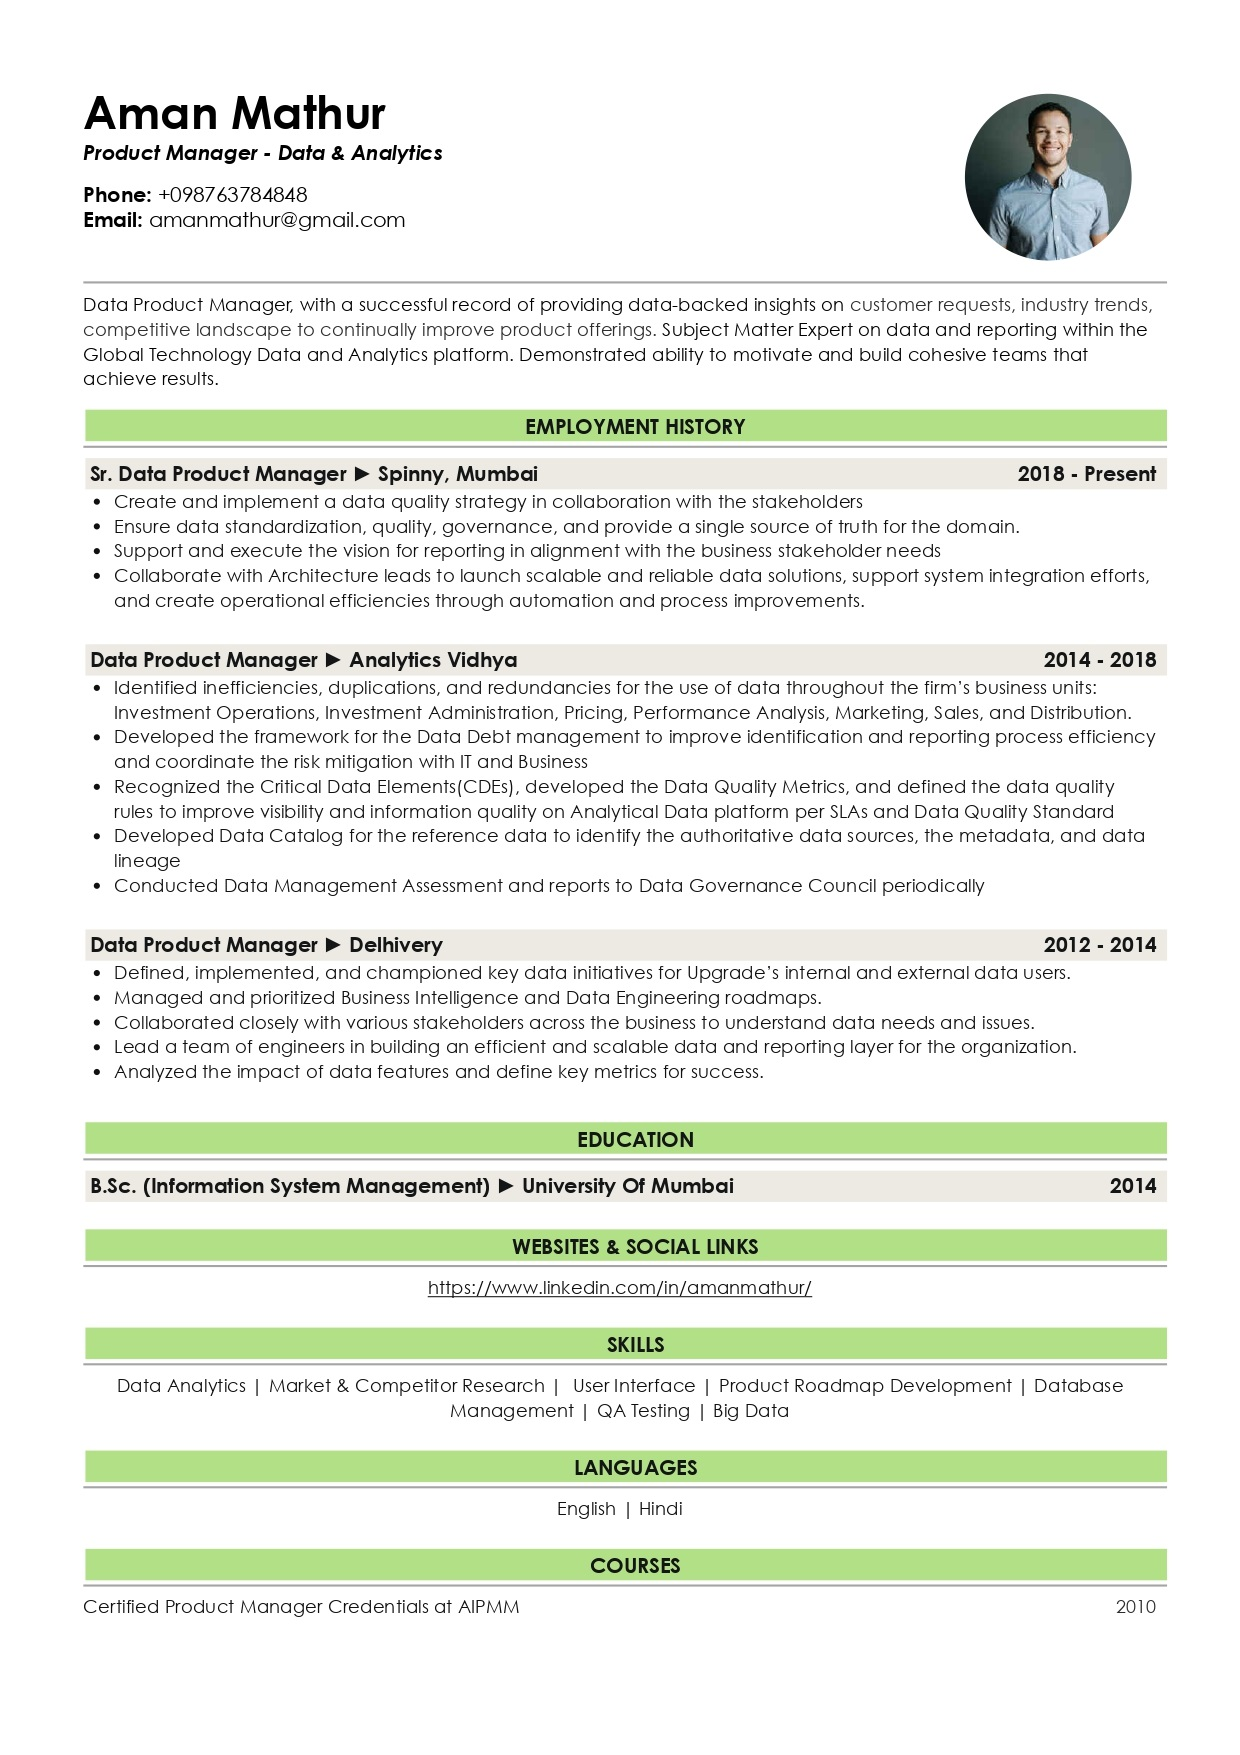 Resume of Data Product Manager